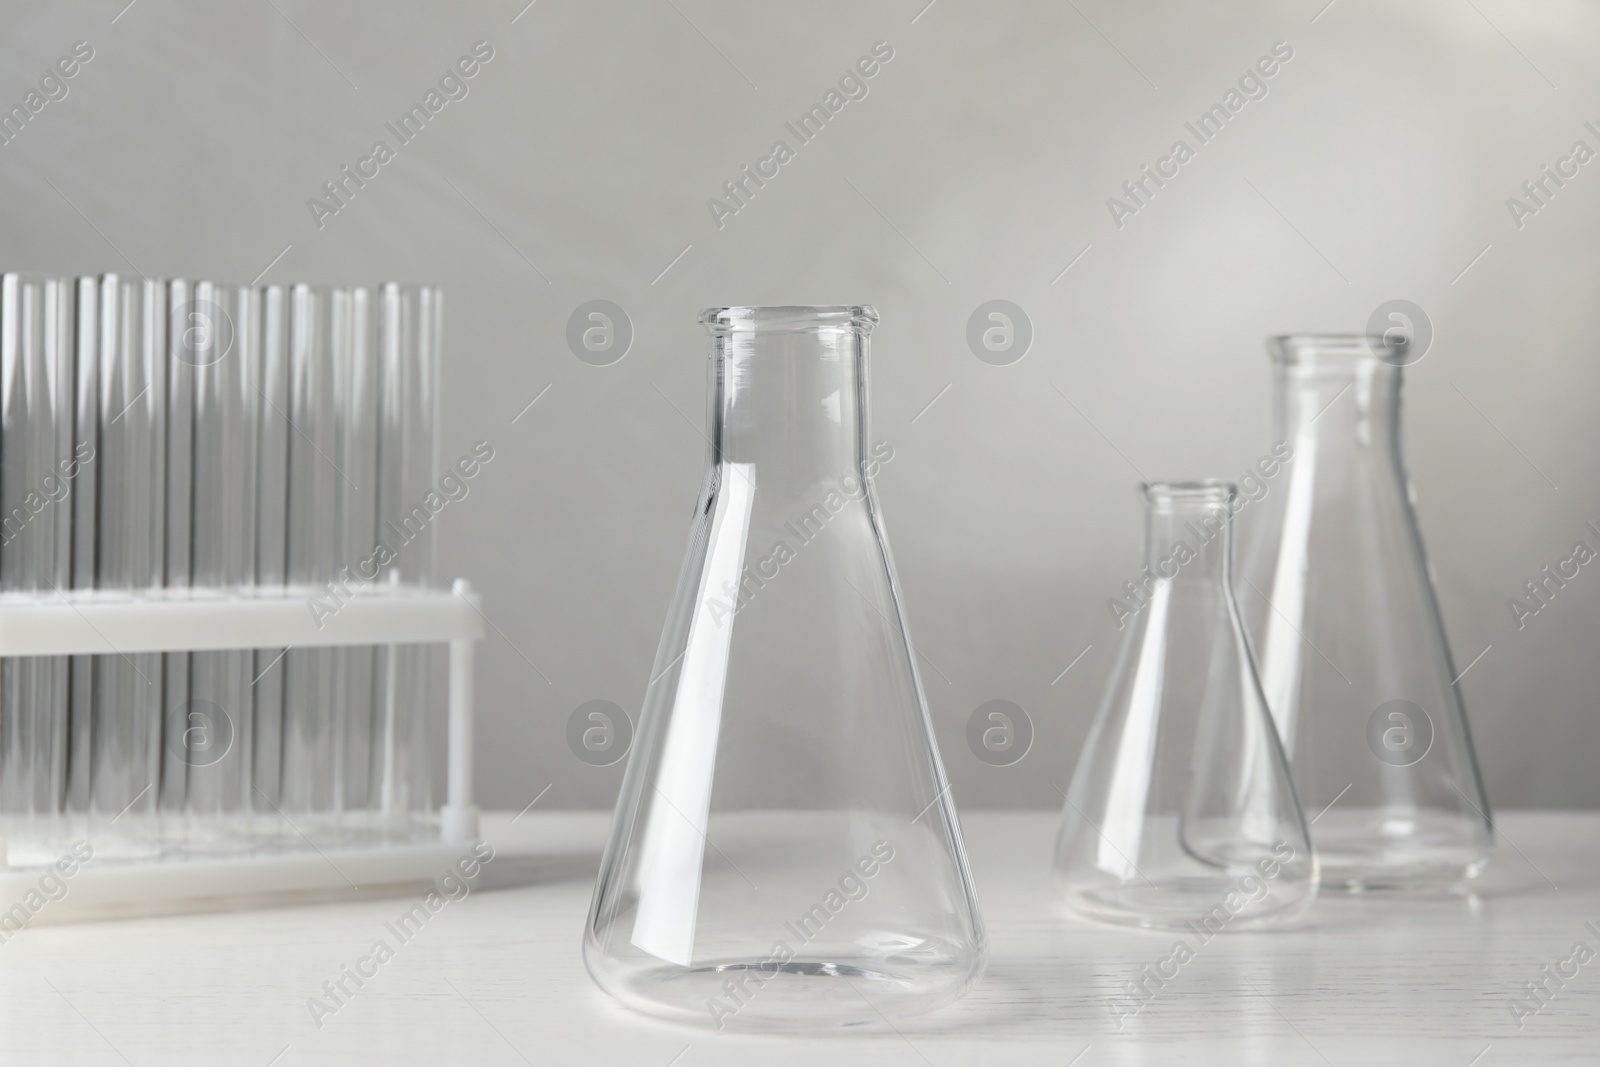 Photo of Set of laboratory glassware on white table against grey background